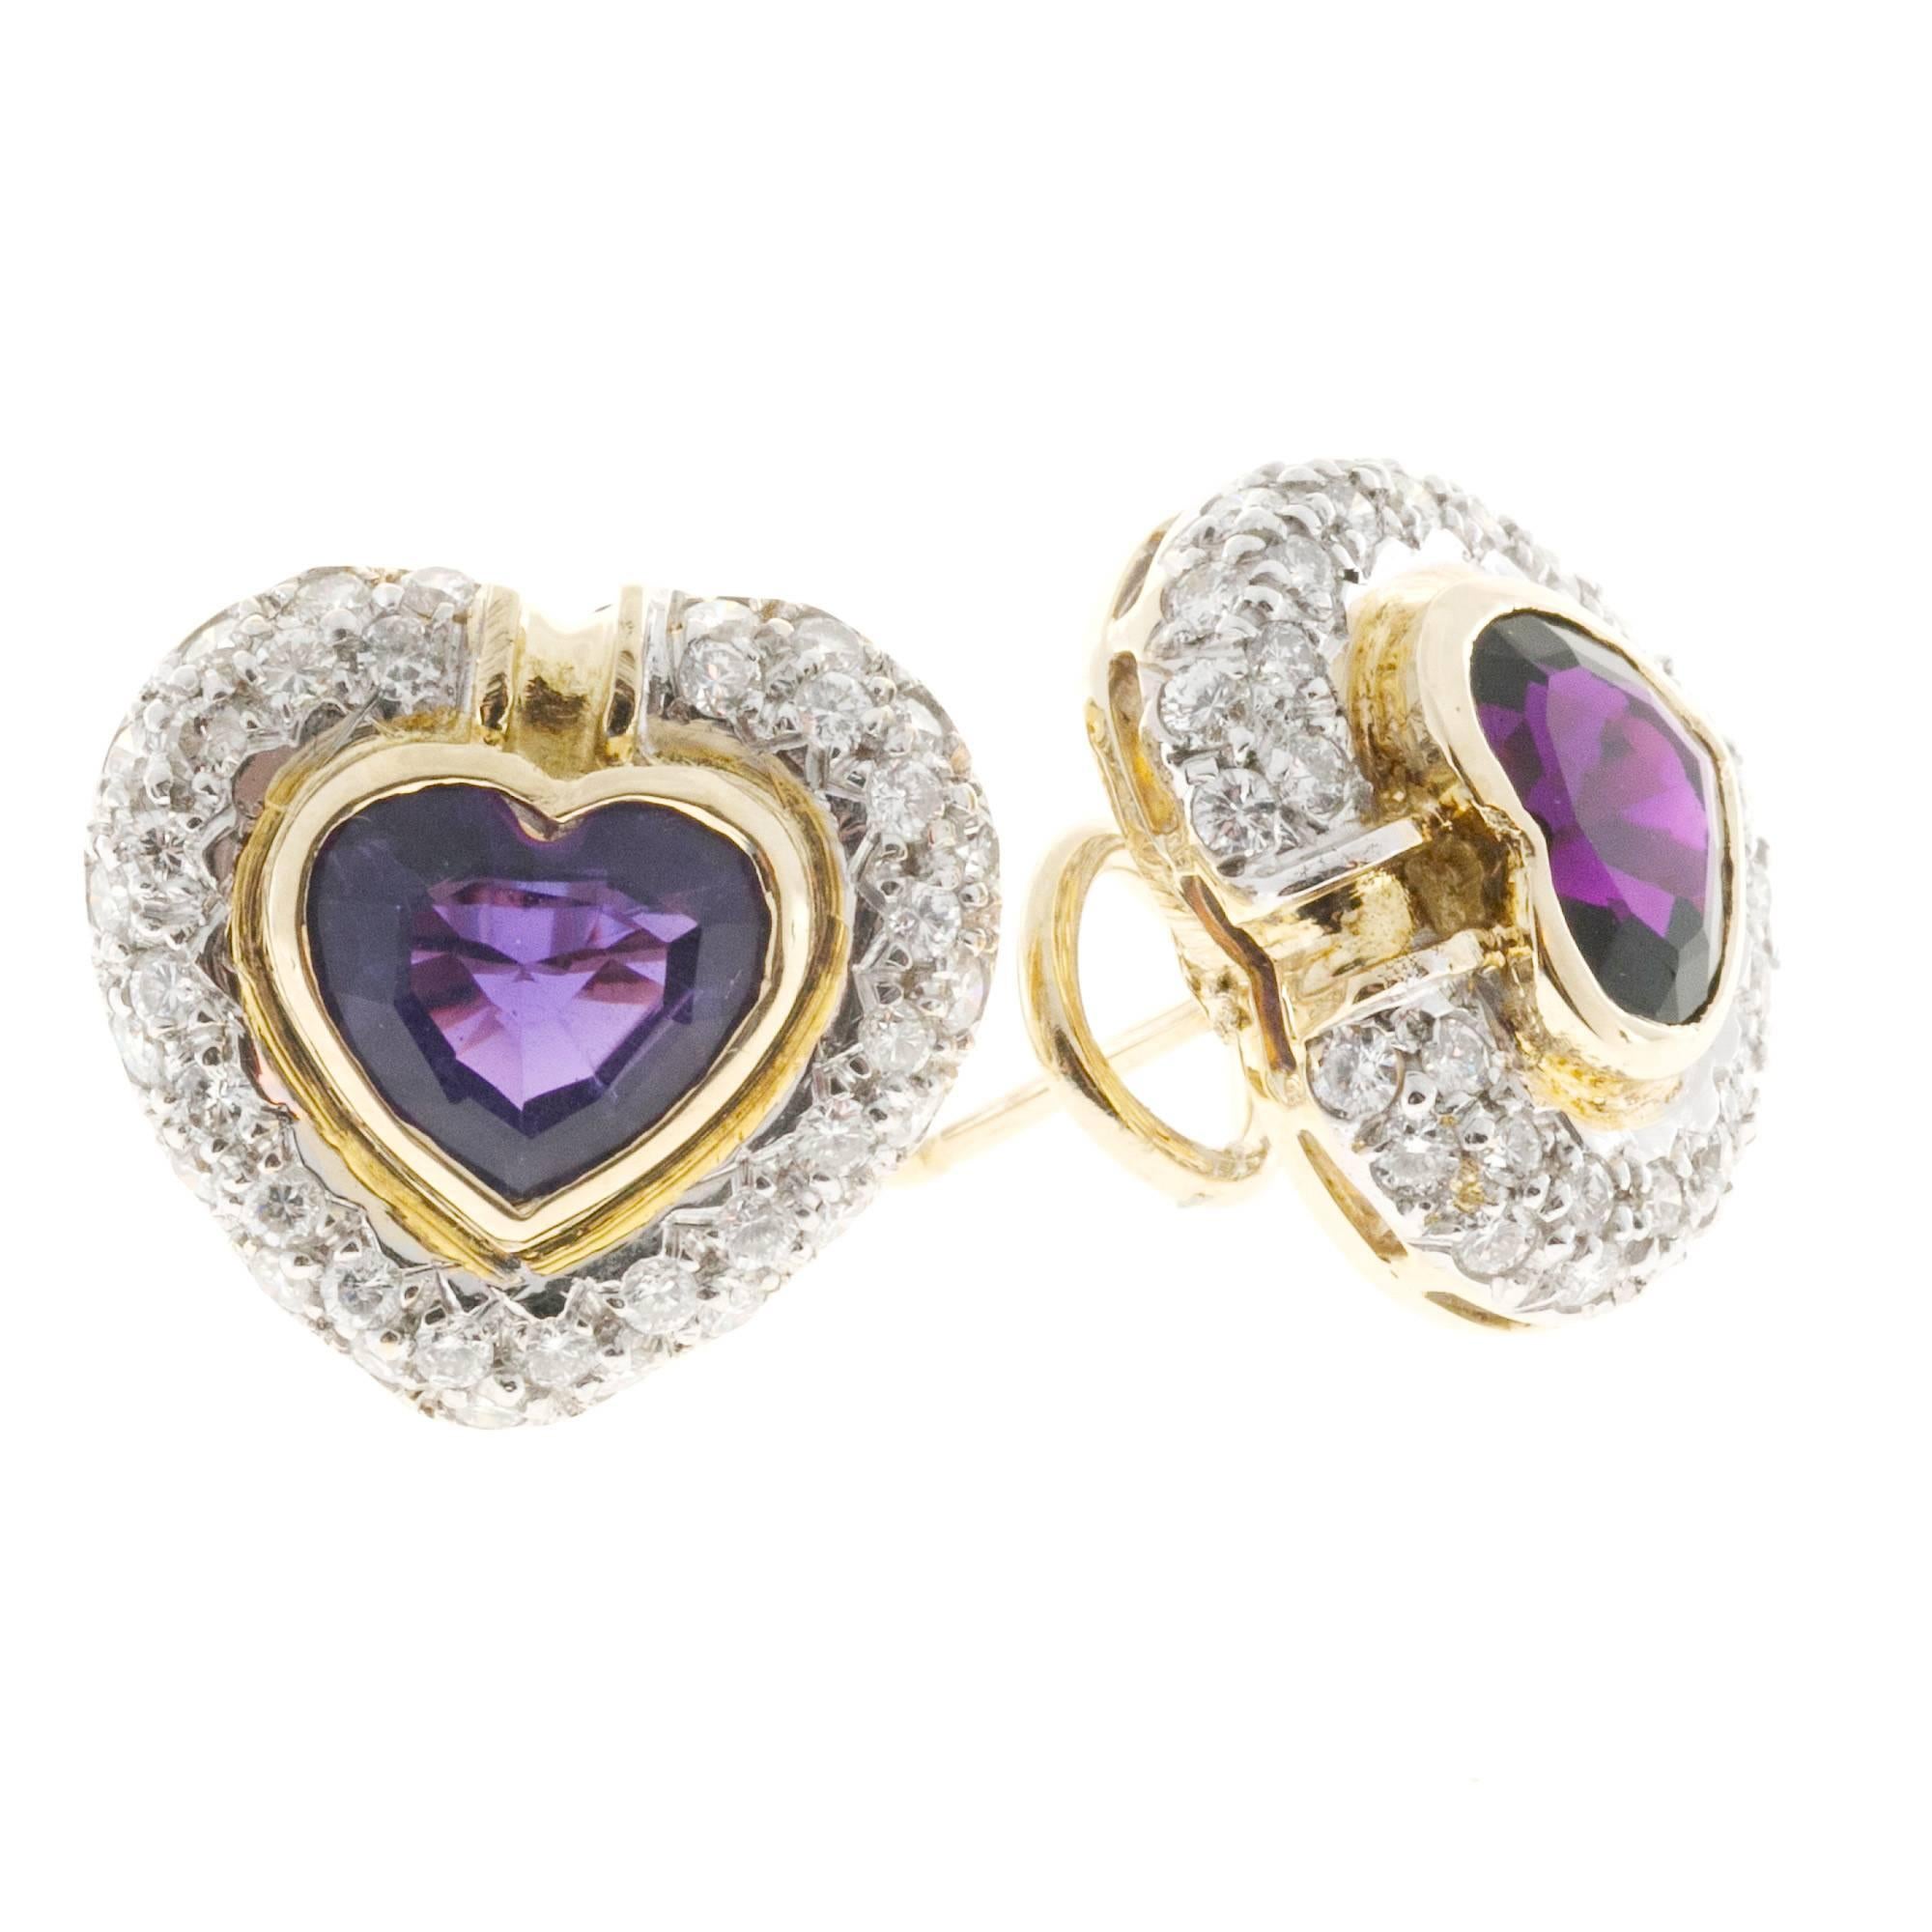 Solid 1960's clip post earrings with deep purple Amethyst surrounded by diamonds in 14k gold yellow and white gold . Circa 1960’s.

2 bright reddish purple Amethyst 8.8 x 7.5 mm, approx. total weight 3.50cts
74 full cut diamonds, approx. total